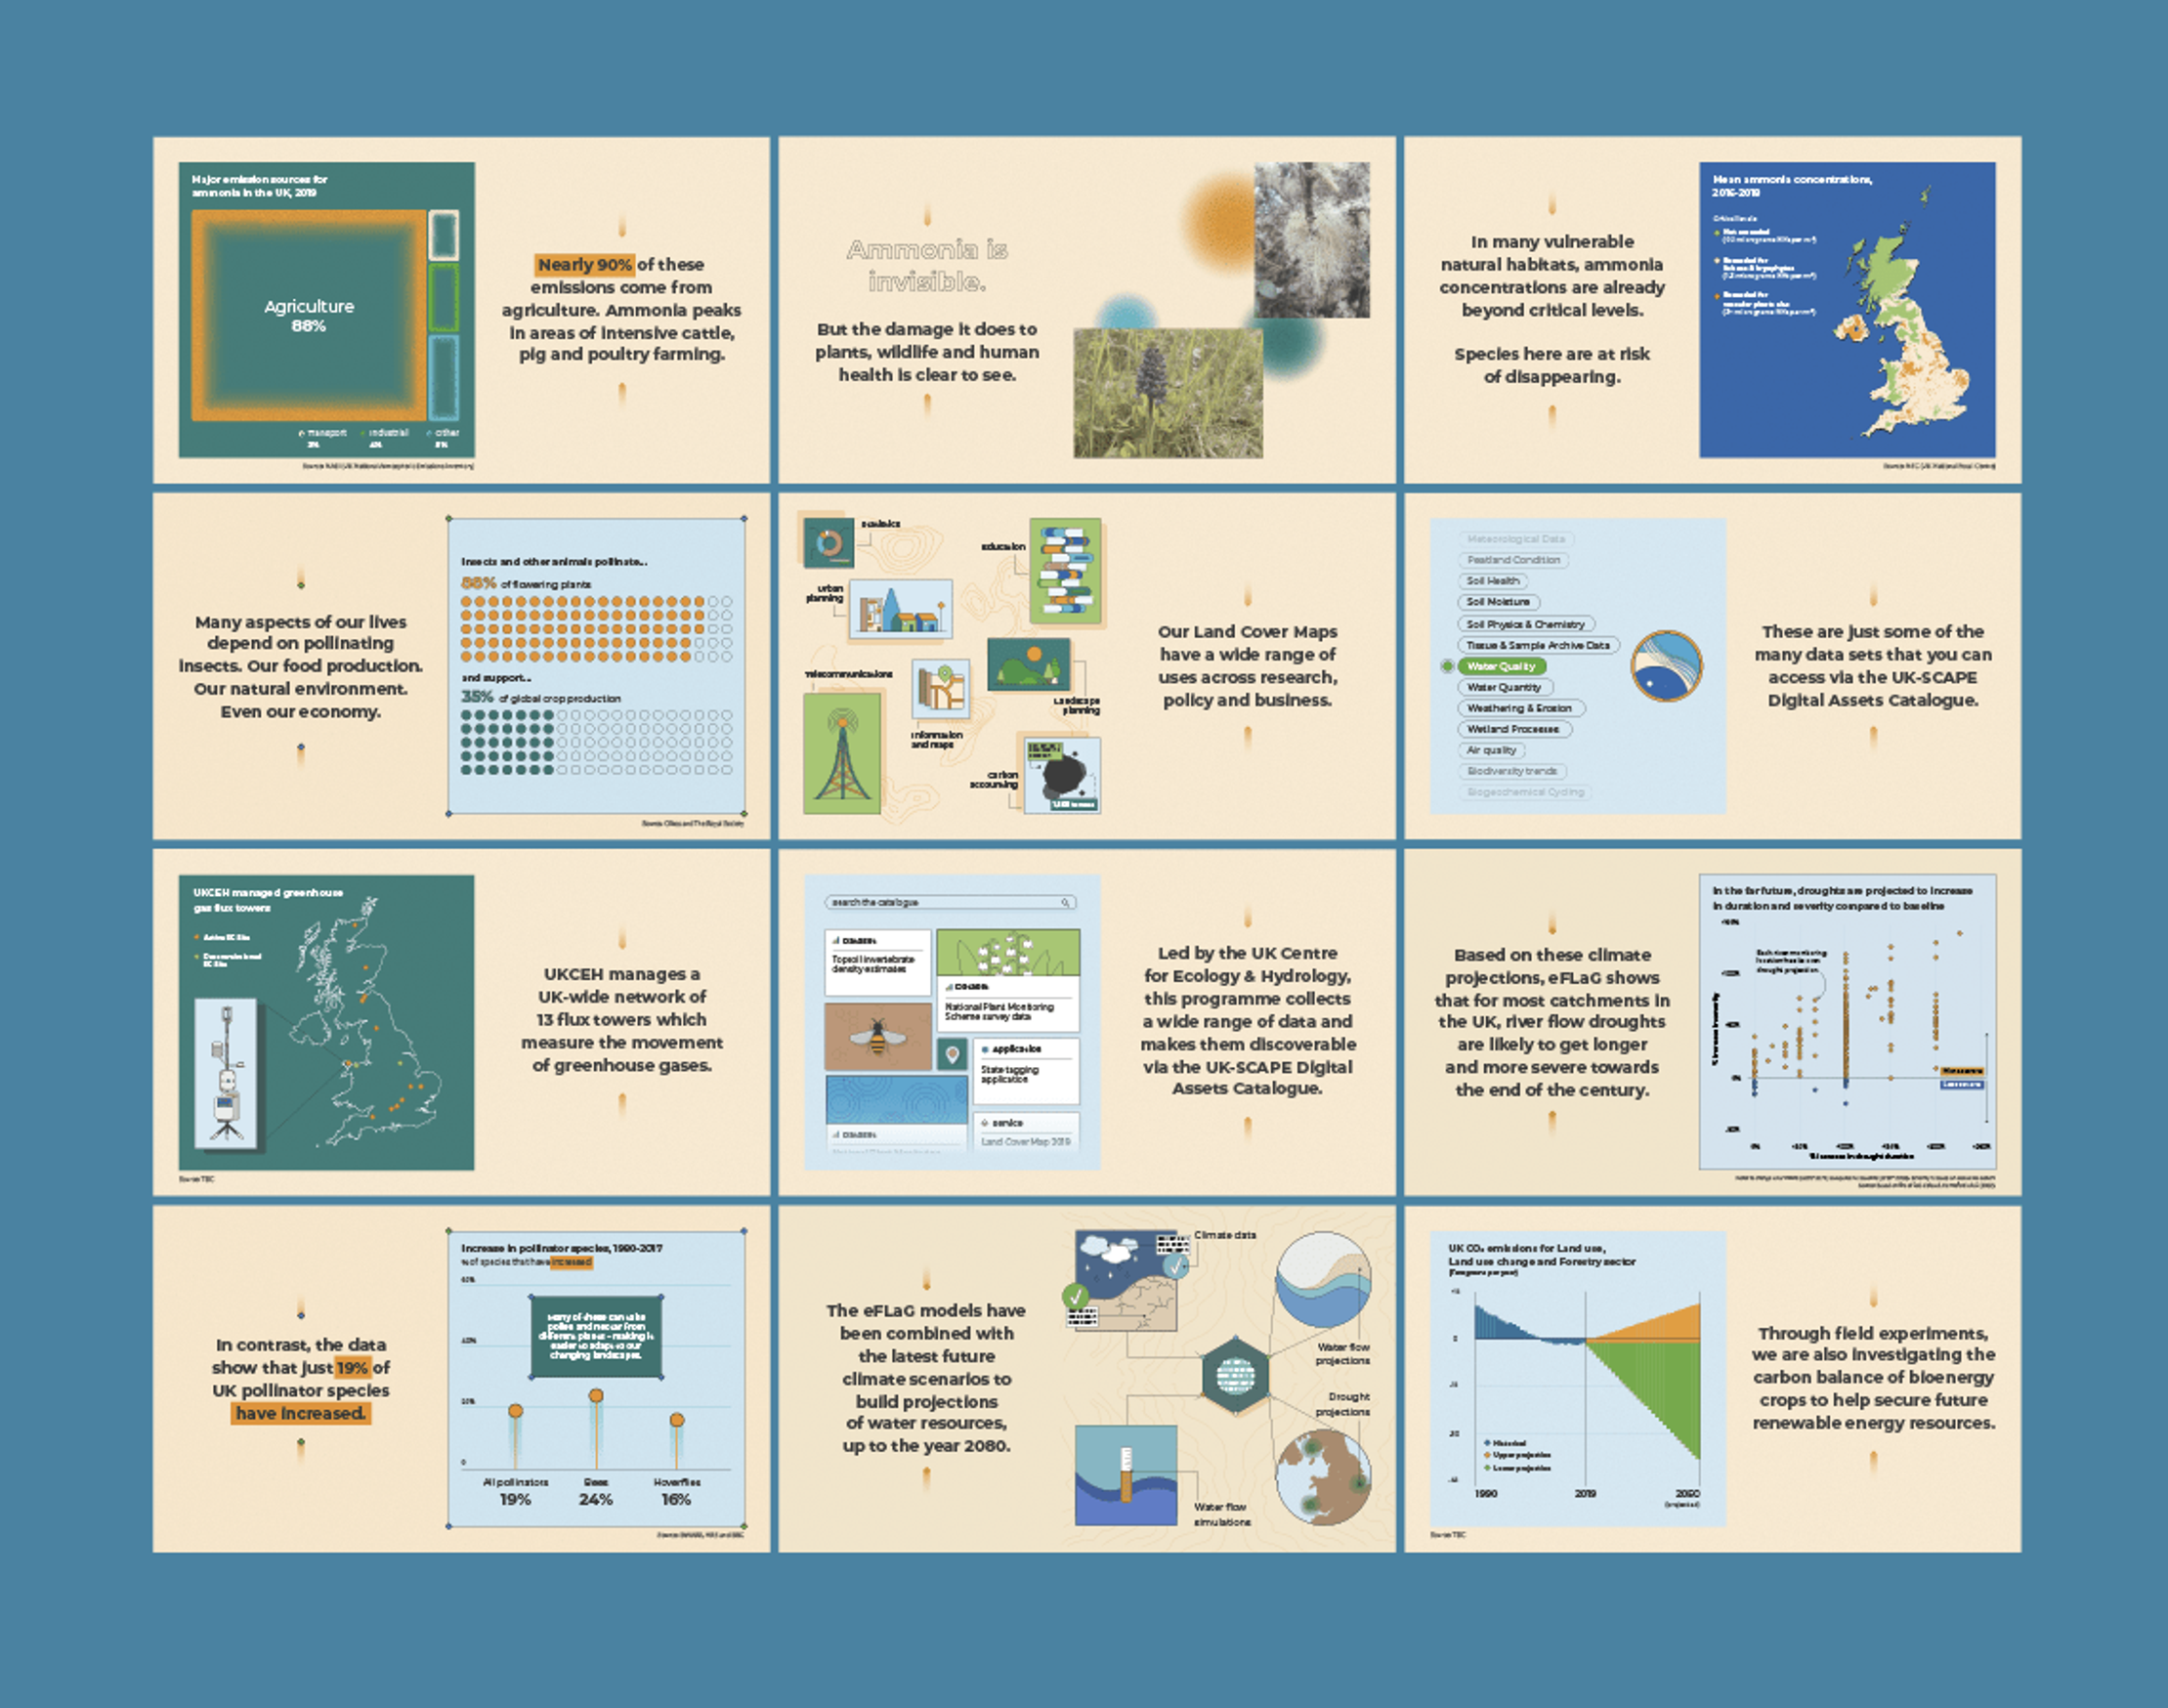 A selection of screenshots from the UKCEH data videos. They include a mix of illustrations, text and data visualizations.